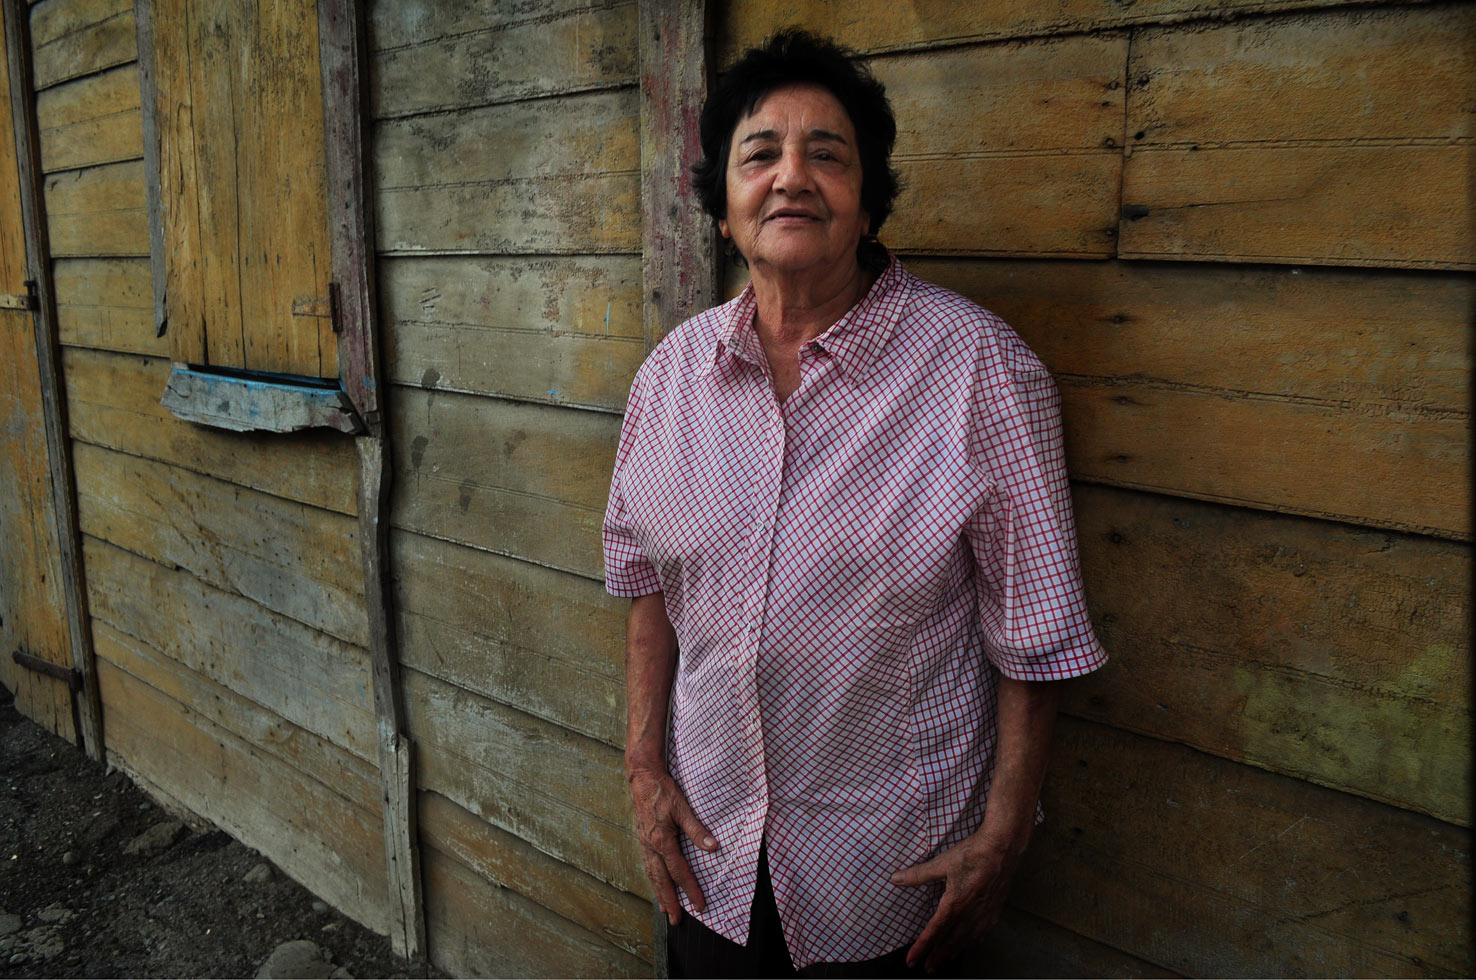 "A couple of years ago, in a small Dominican town near the Haitian border, I met and became friends with Georgette Michelen and her family. Georgette lives in a beautiful, enormous wooden house her father built at the beginning of the last century: 'The House of the Sun.'